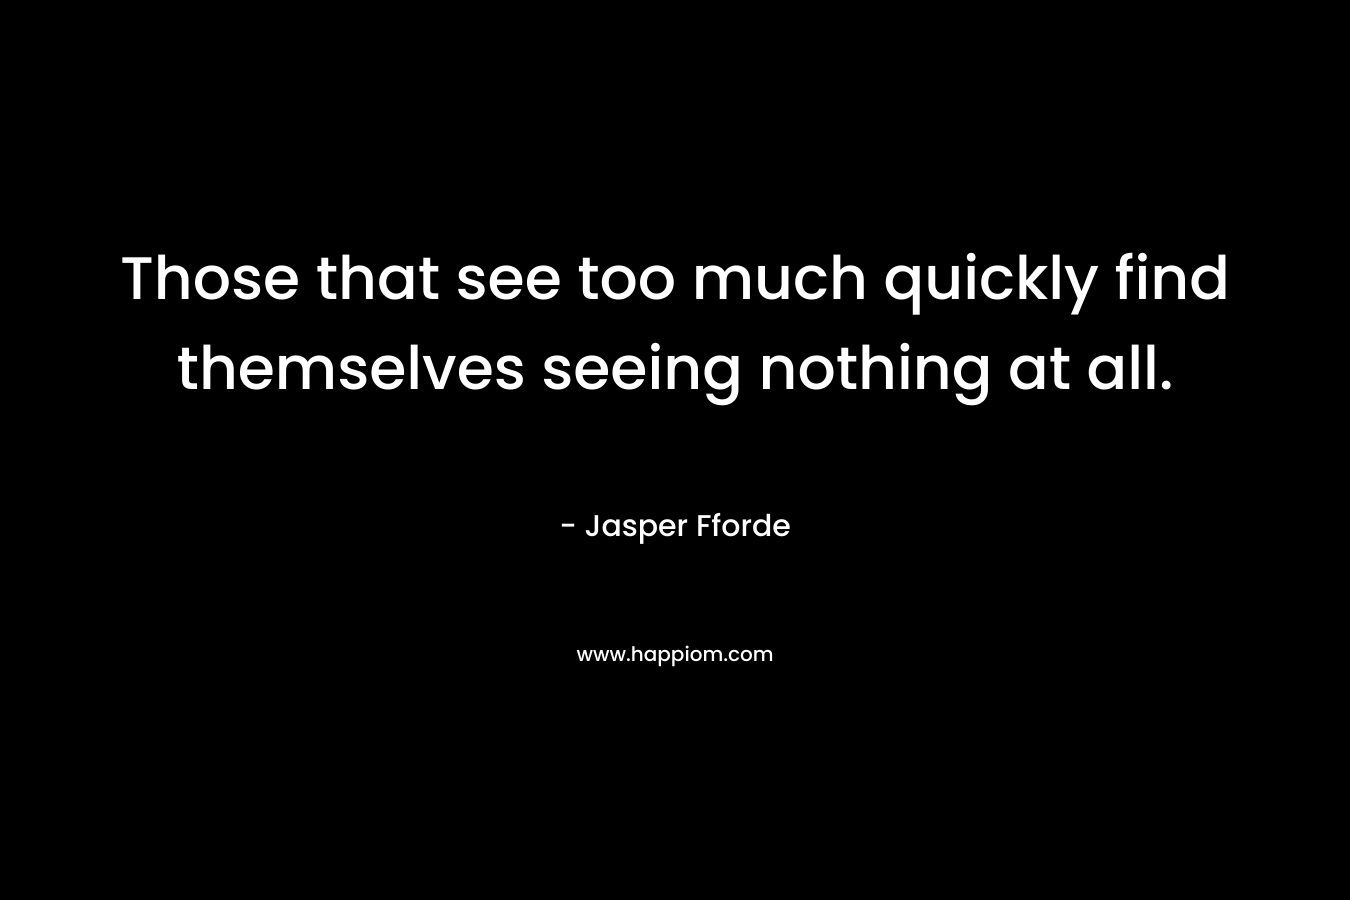 Those that see too much quickly find themselves seeing nothing at all. – Jasper Fforde